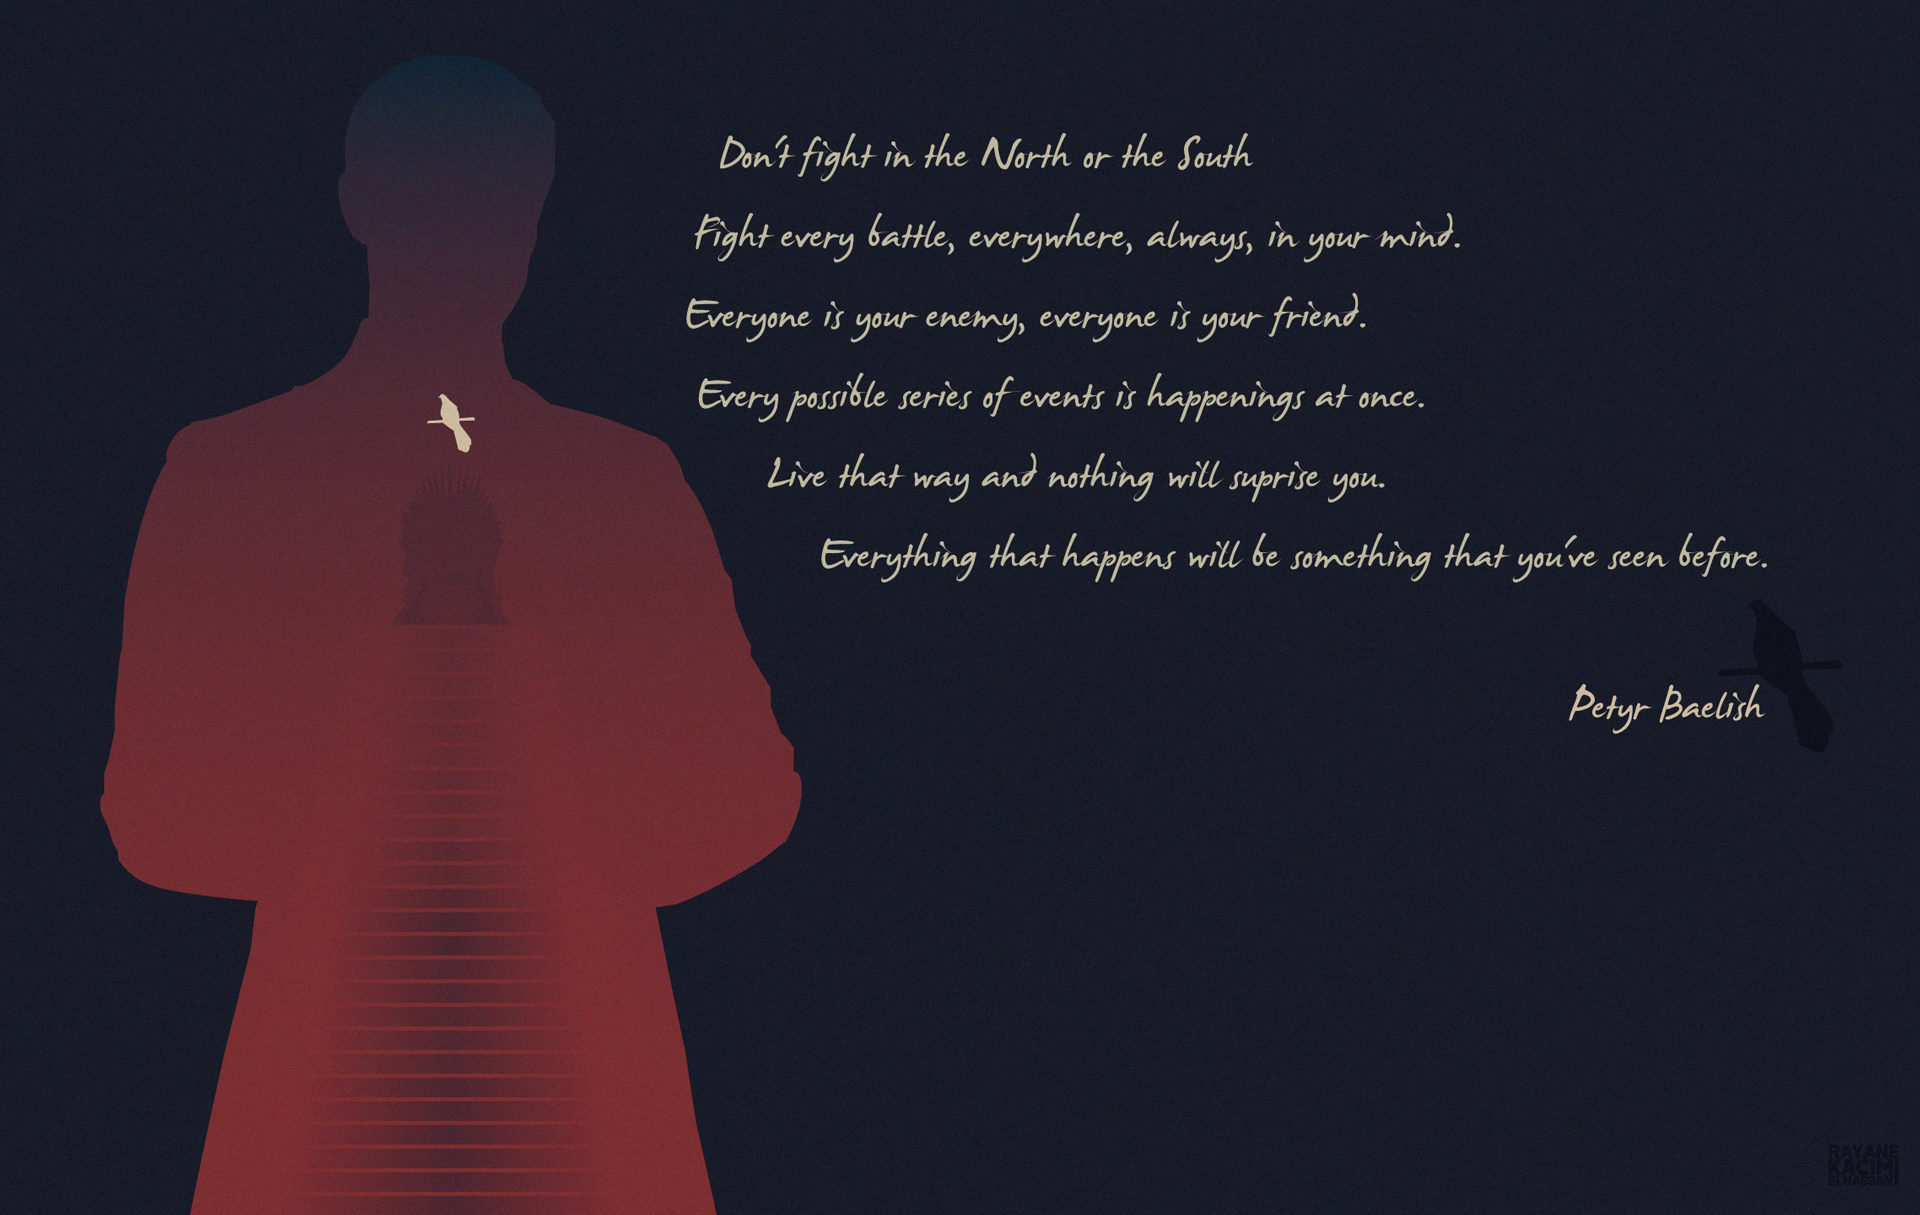 S7E3] Petyr Baelish gave me chills with this quote so i made a